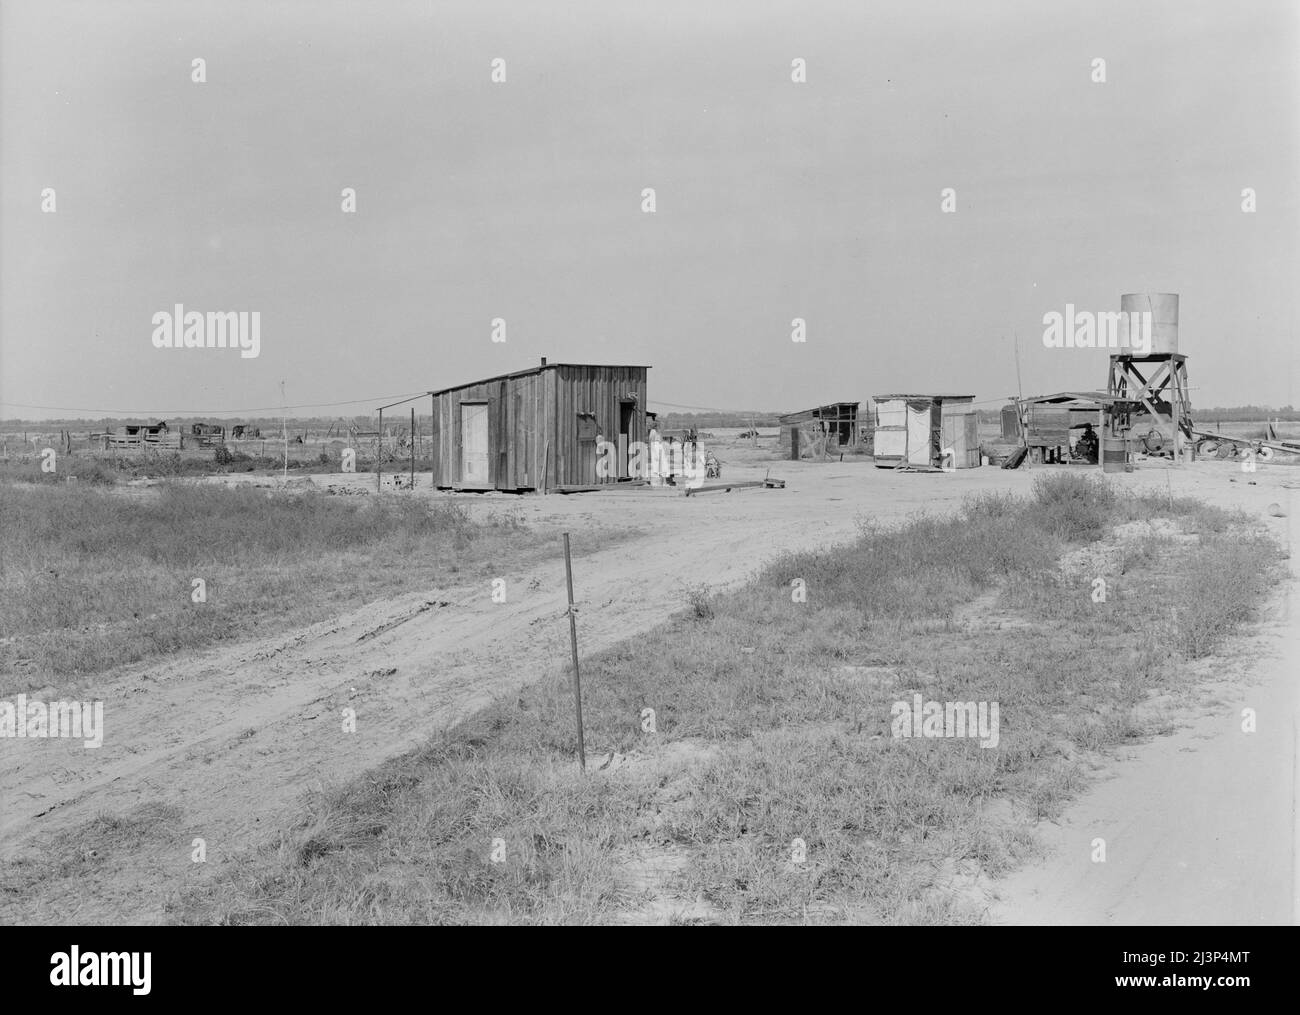 Home of rural rehabilitation client. Tulare County, California. They bought twenty acres of raw unimproved land with a first payment of fifty dollars which was money saved out of relief budget (August 1936). They received a FSA (Farm Security Administration) loan of seven hundred dollars for stock and equipment. Now they have a one-room shack, seven cows, three sows, and homemade pumping plant, along with ten acres of improved permanent pasture. Cream check approximately thirty dollars a month. Husband also works about ten days a month on odd jobs outside the farm. Husband is twenty-six years Stock Photo